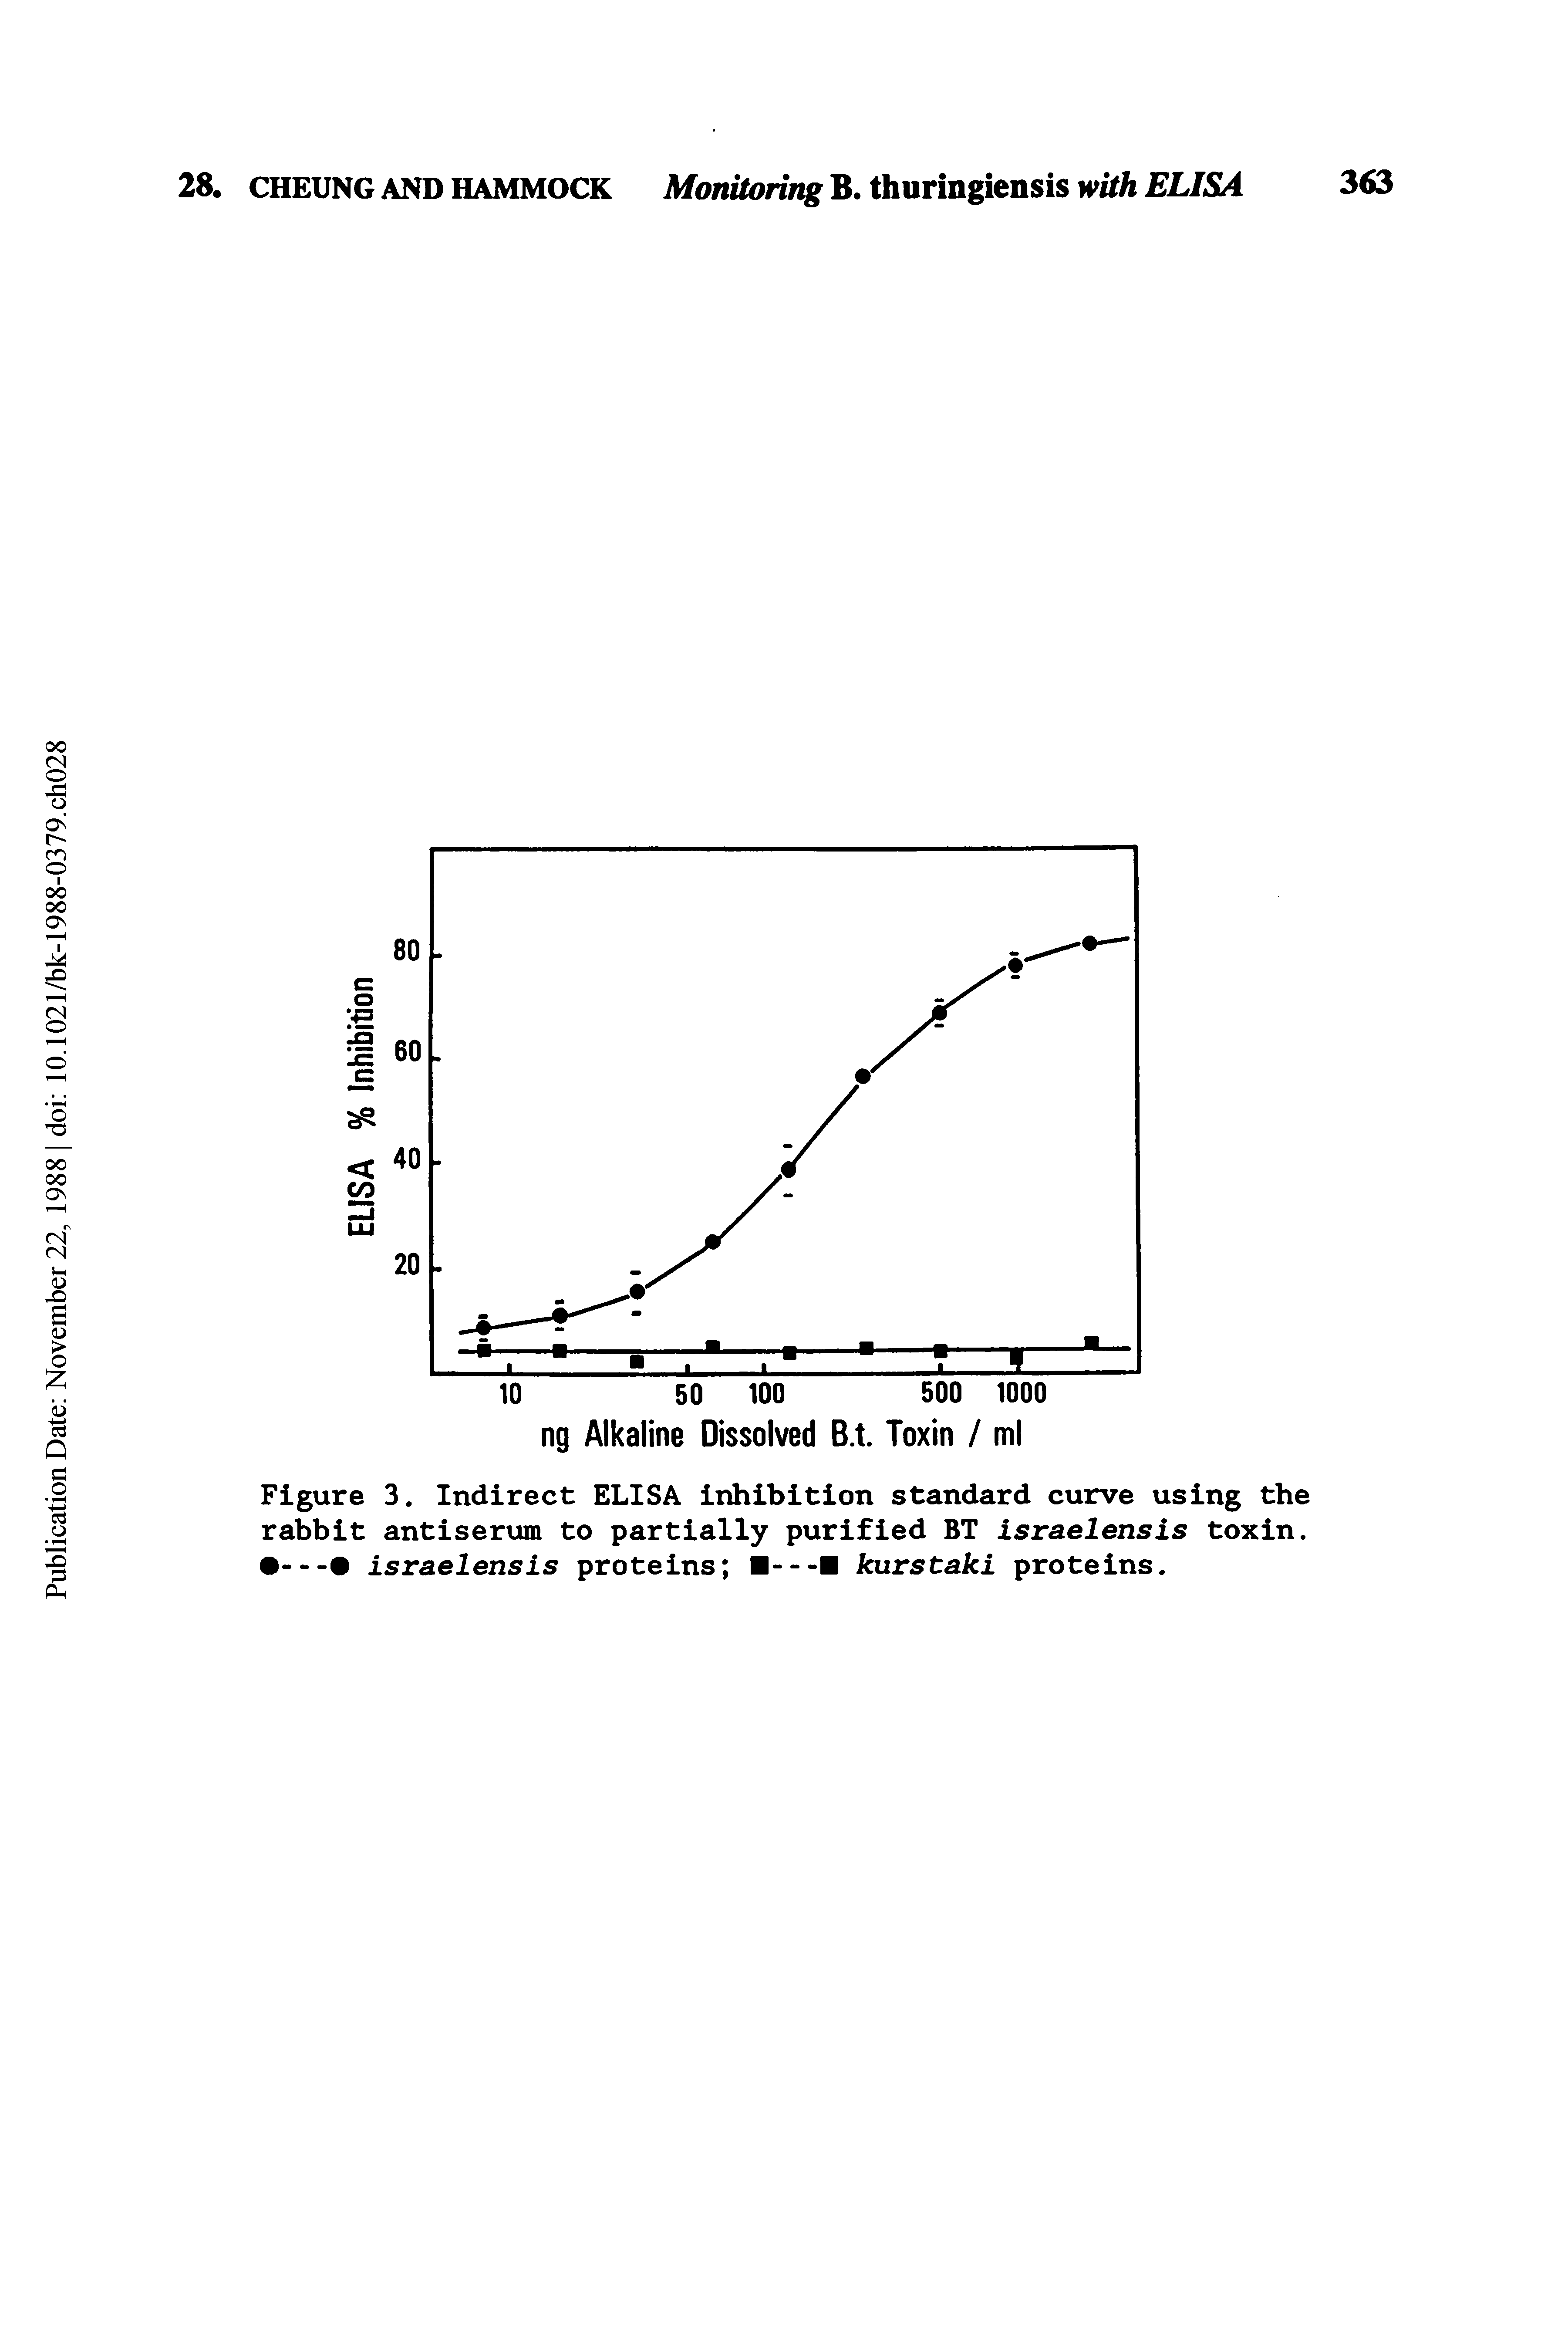 Figure 3. Indirect ELISA inhibition standard curve using the rabbit antiserum to partially purified BT israelensis toxin. — israelensis proteins — kurstaki proteins.